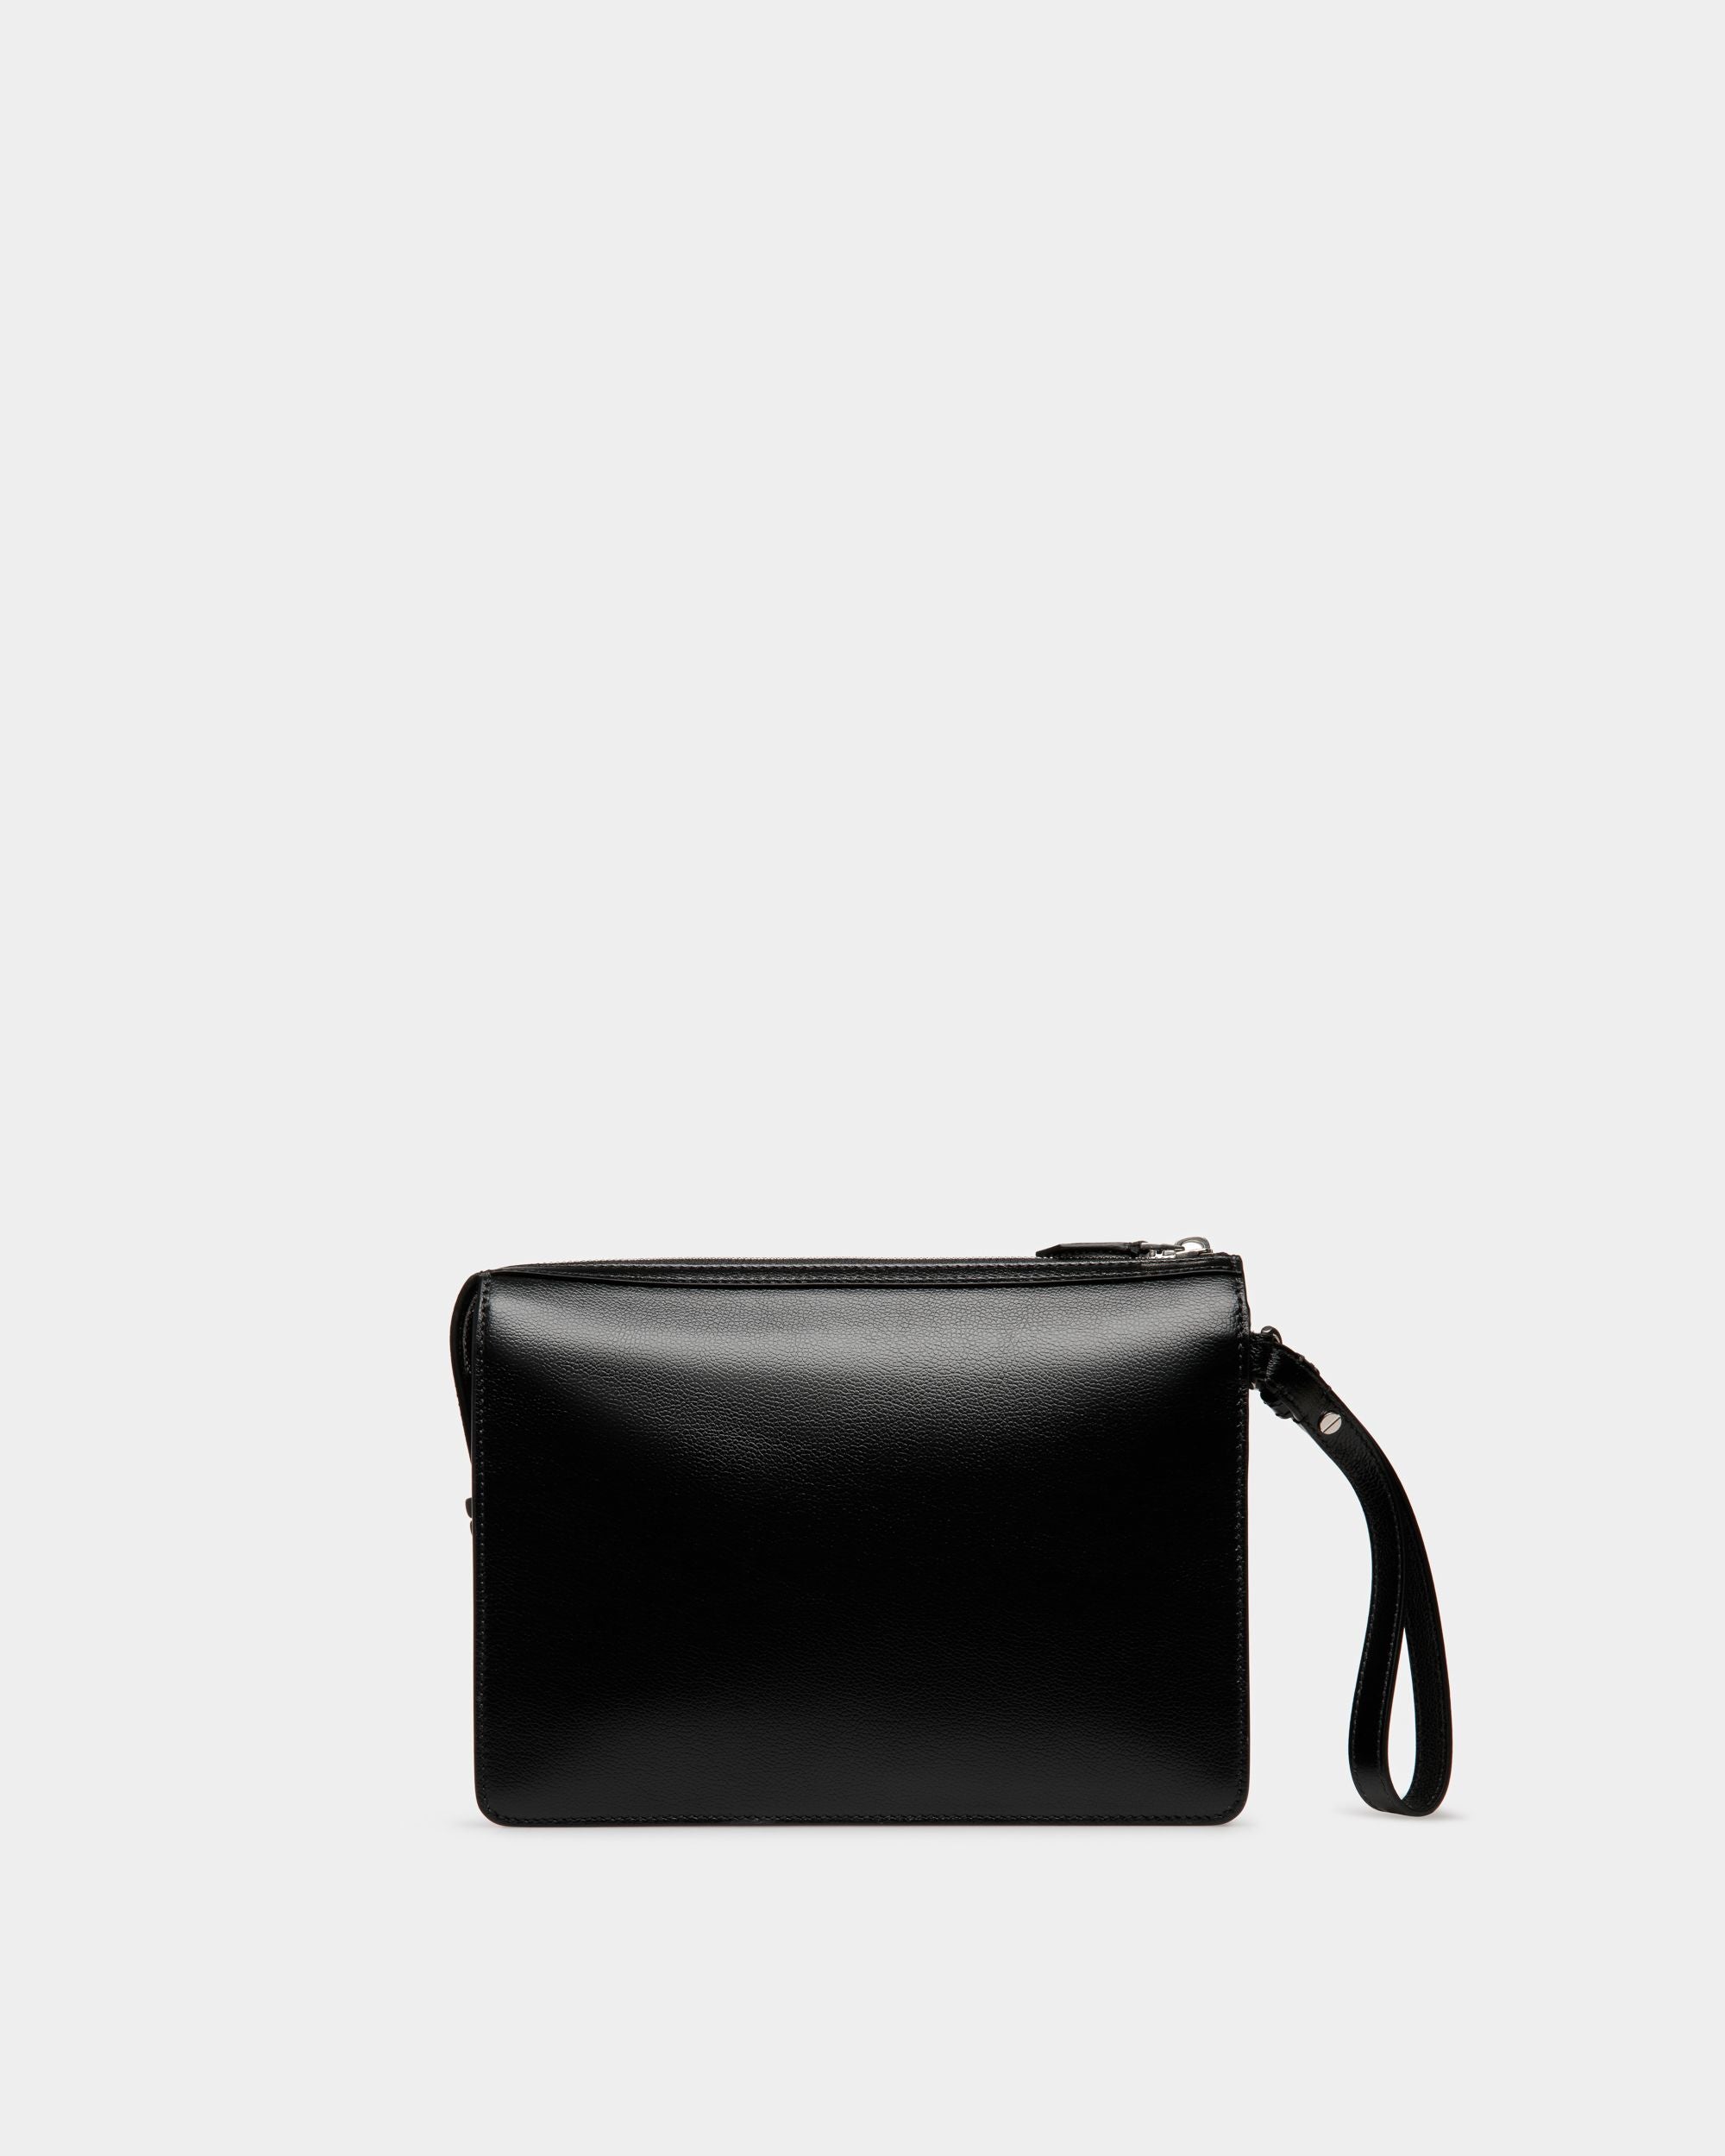 PM | Men's Clutches And Portfolios | Black Leather | Bally | Still Life Back